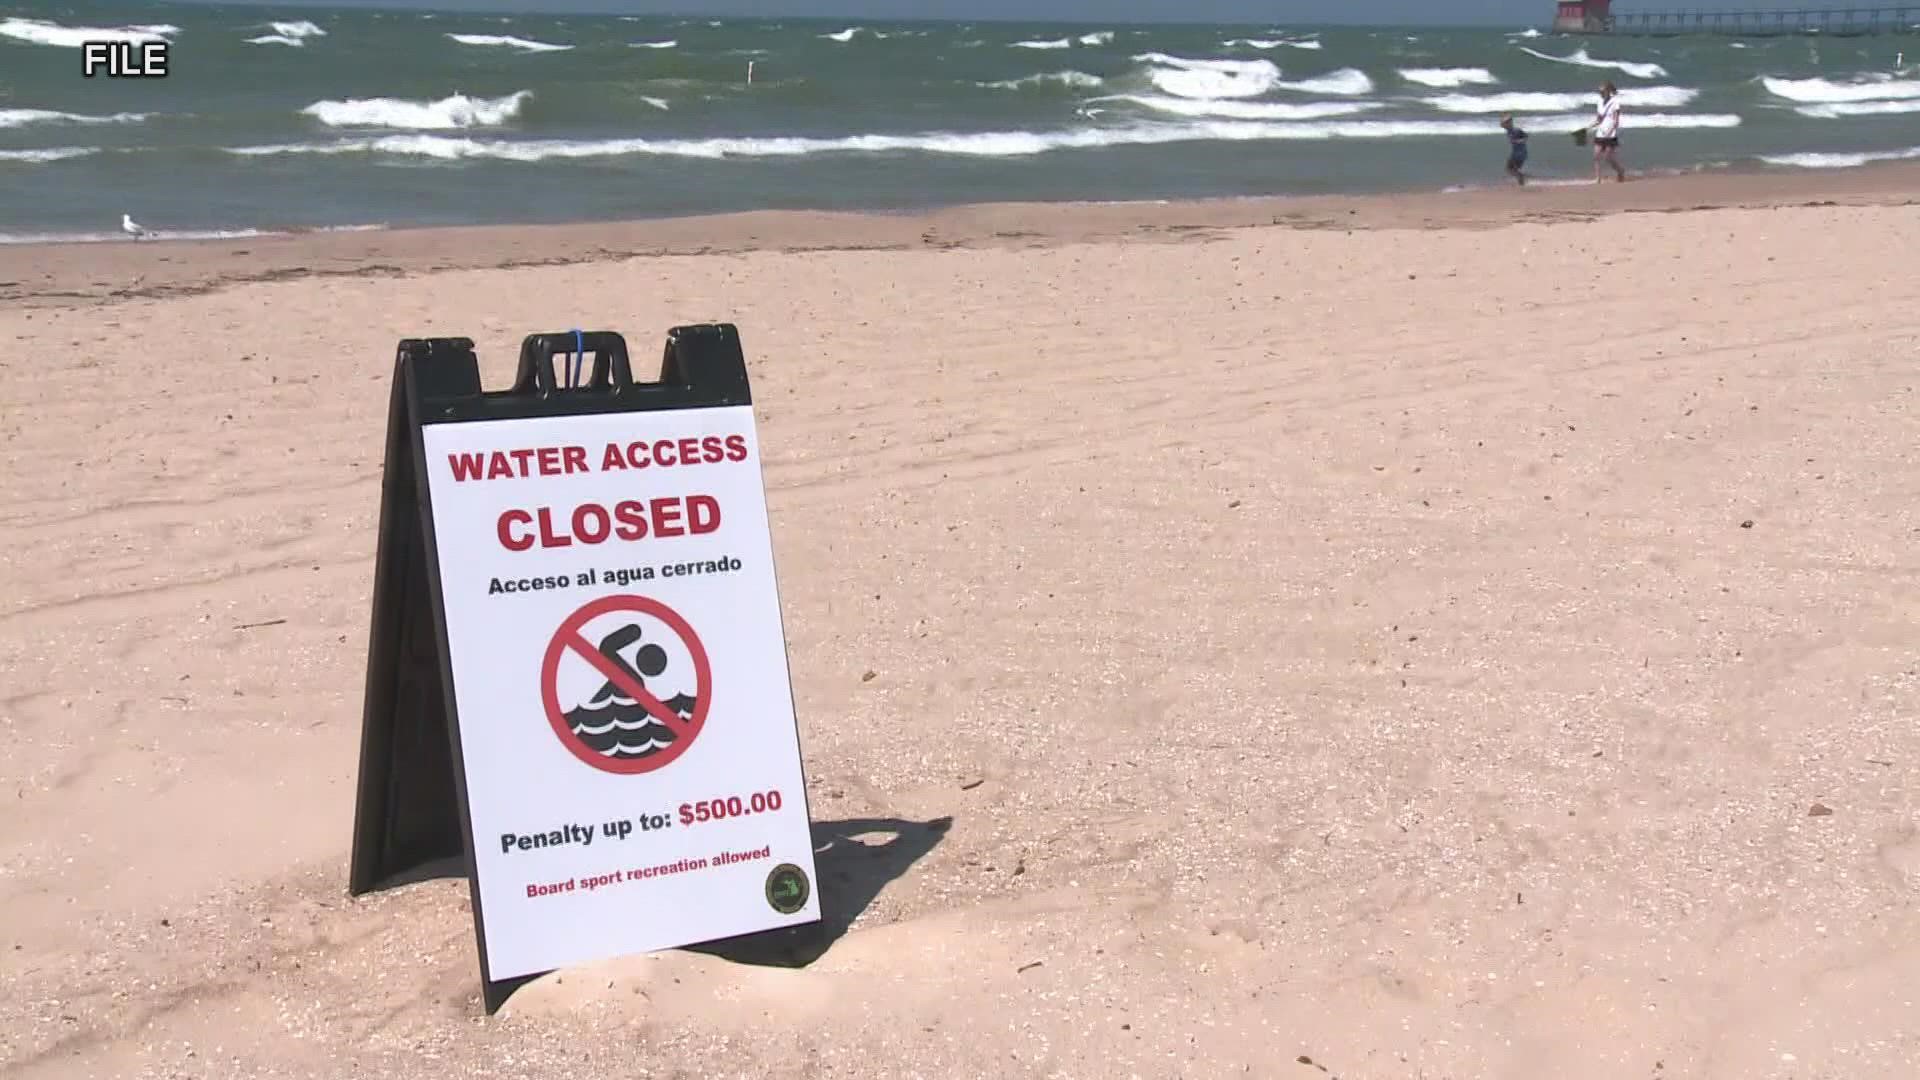 Just this week at least three people drowned along the West Michigan lakeshore.